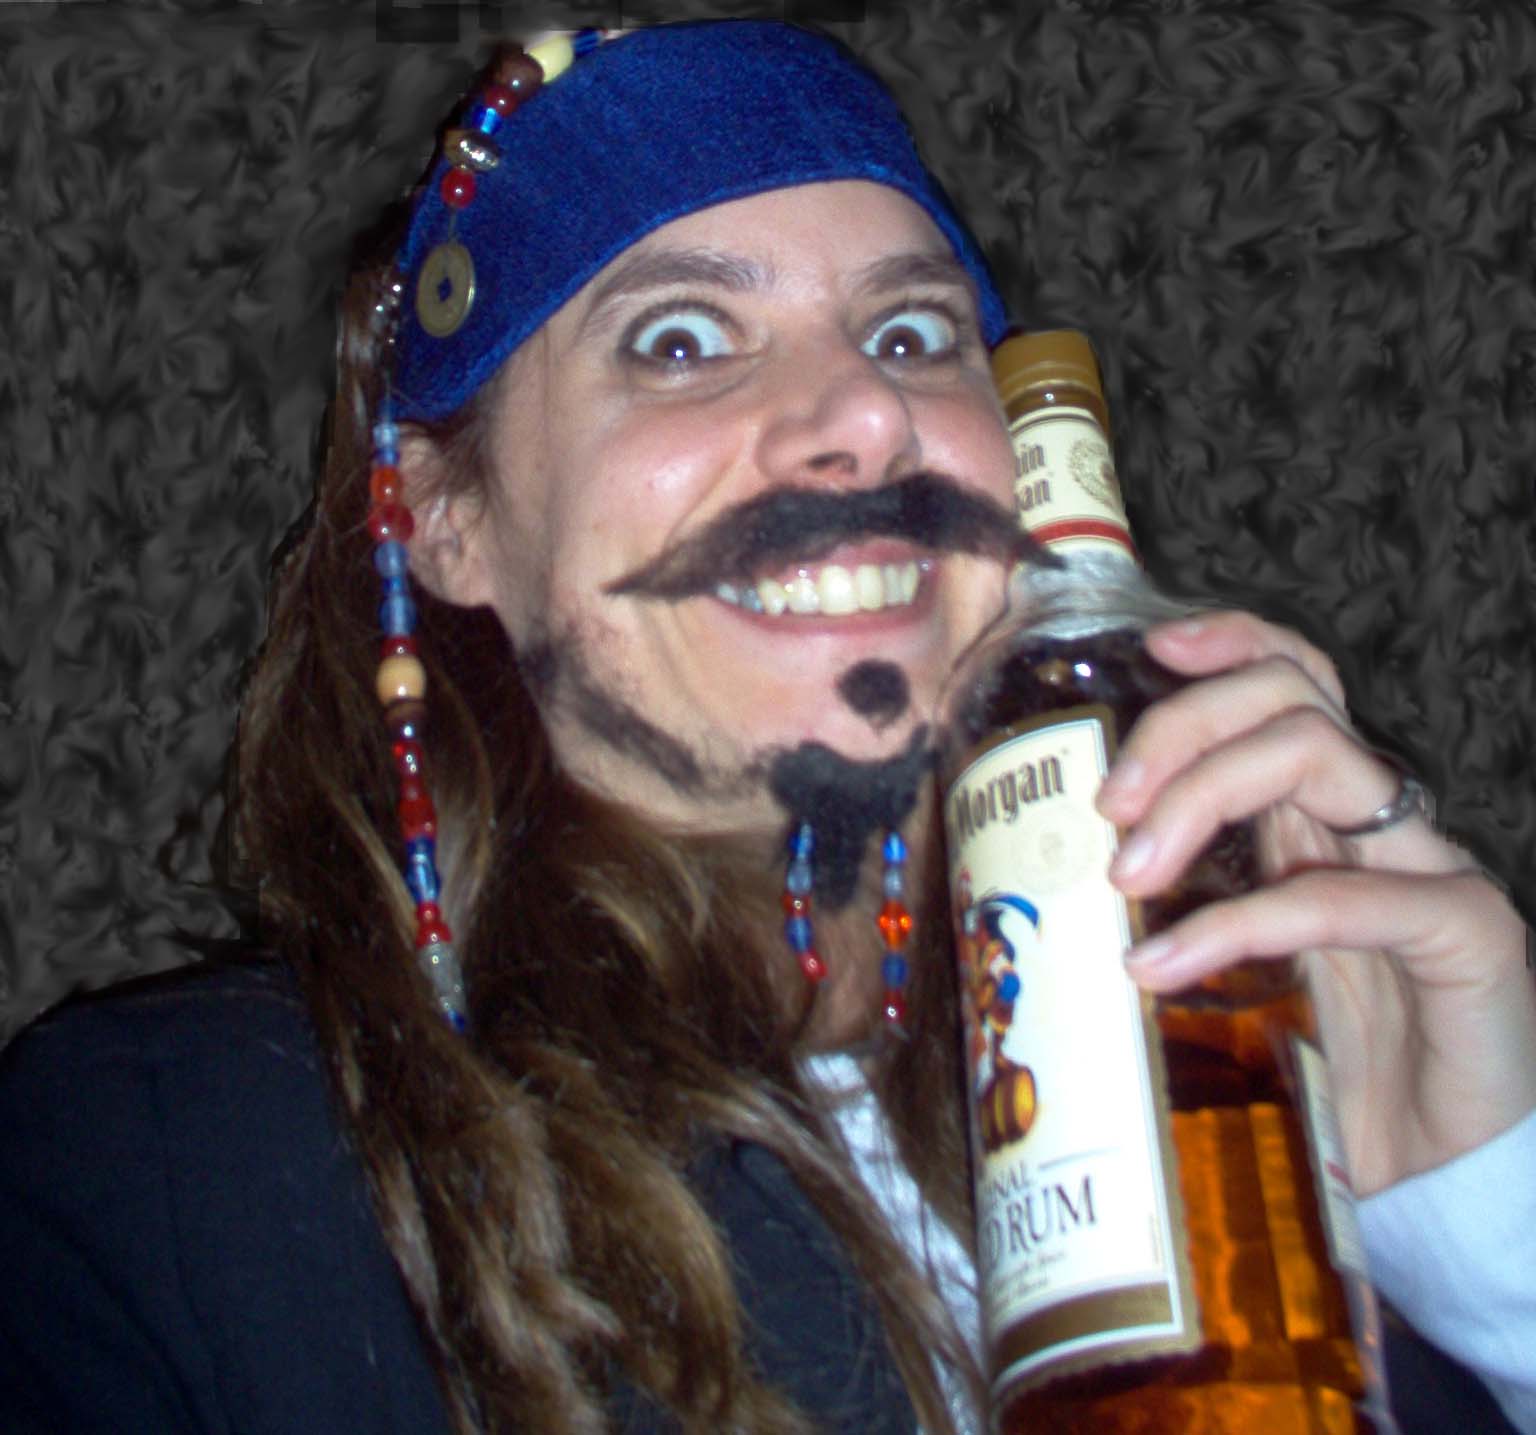 Image shows me dressed as Captain Jack Sparrow, holding a bottle of Captian Morgan rum.